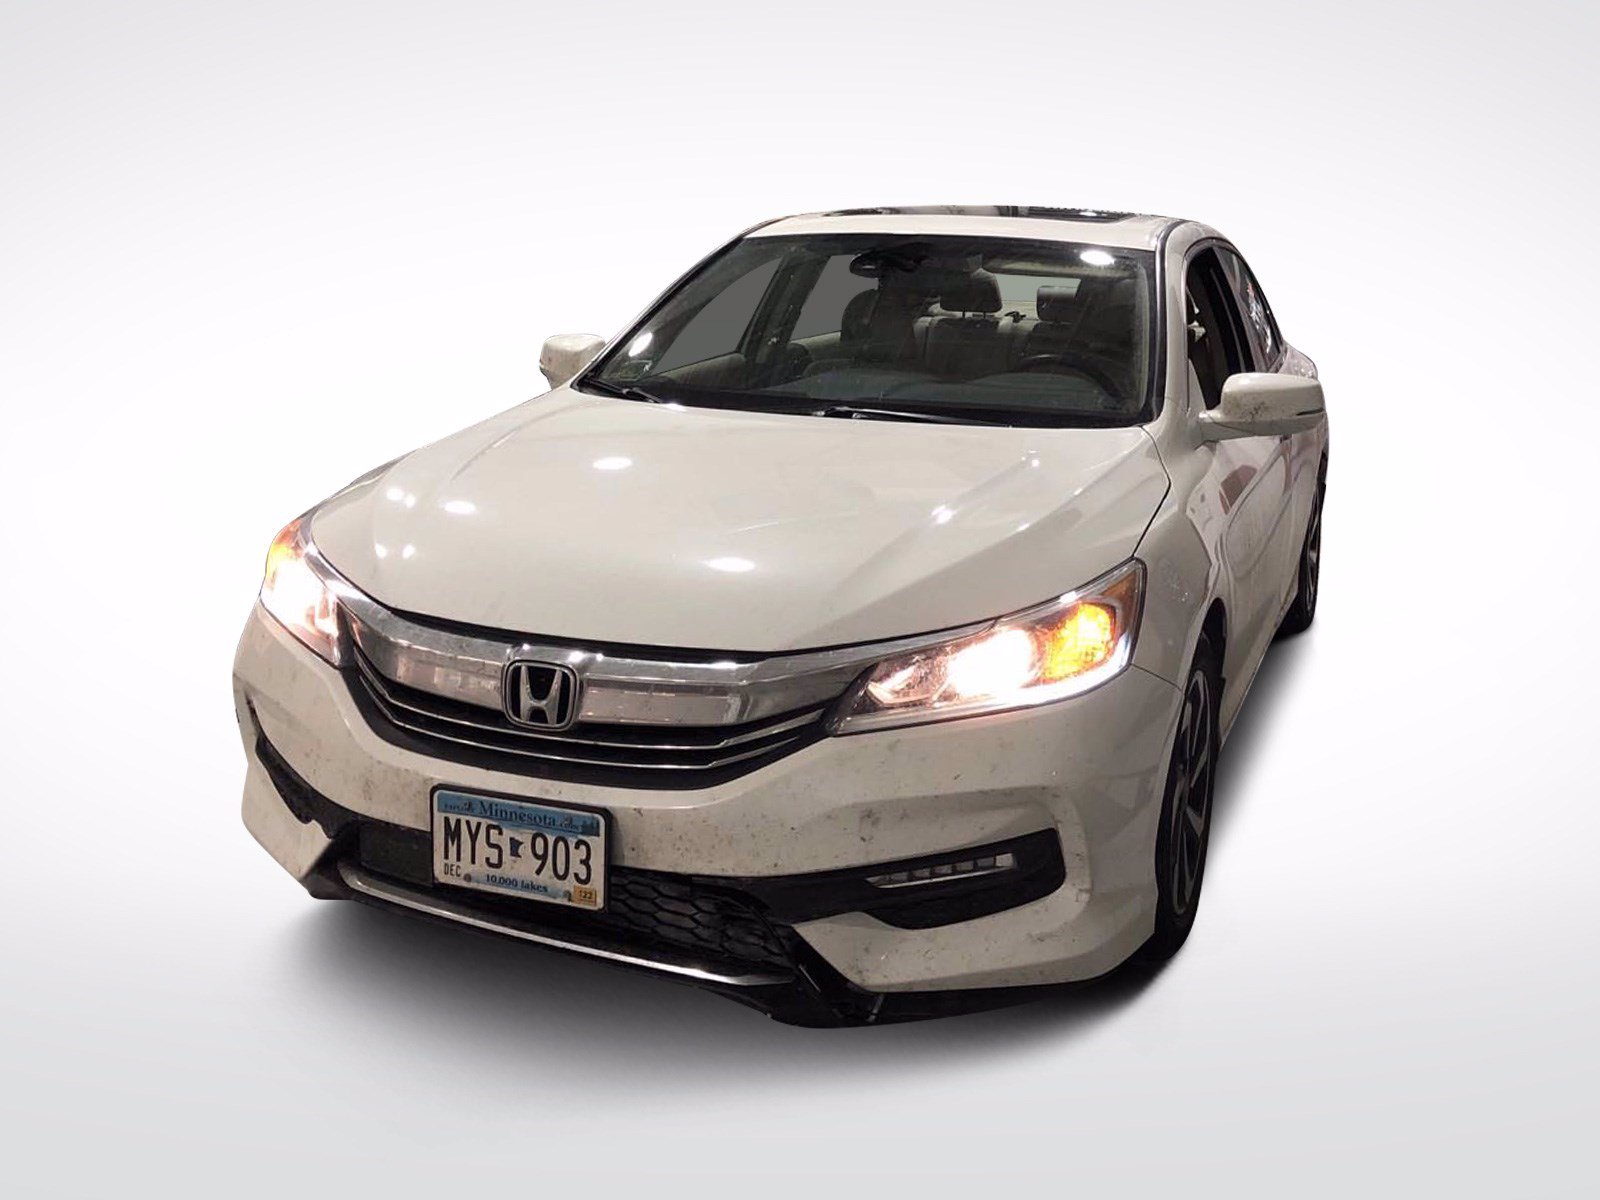 Used 2016 Honda Accord EX-L with VIN 1HGCR2F99GA004123 for sale in Baxter, Minnesota